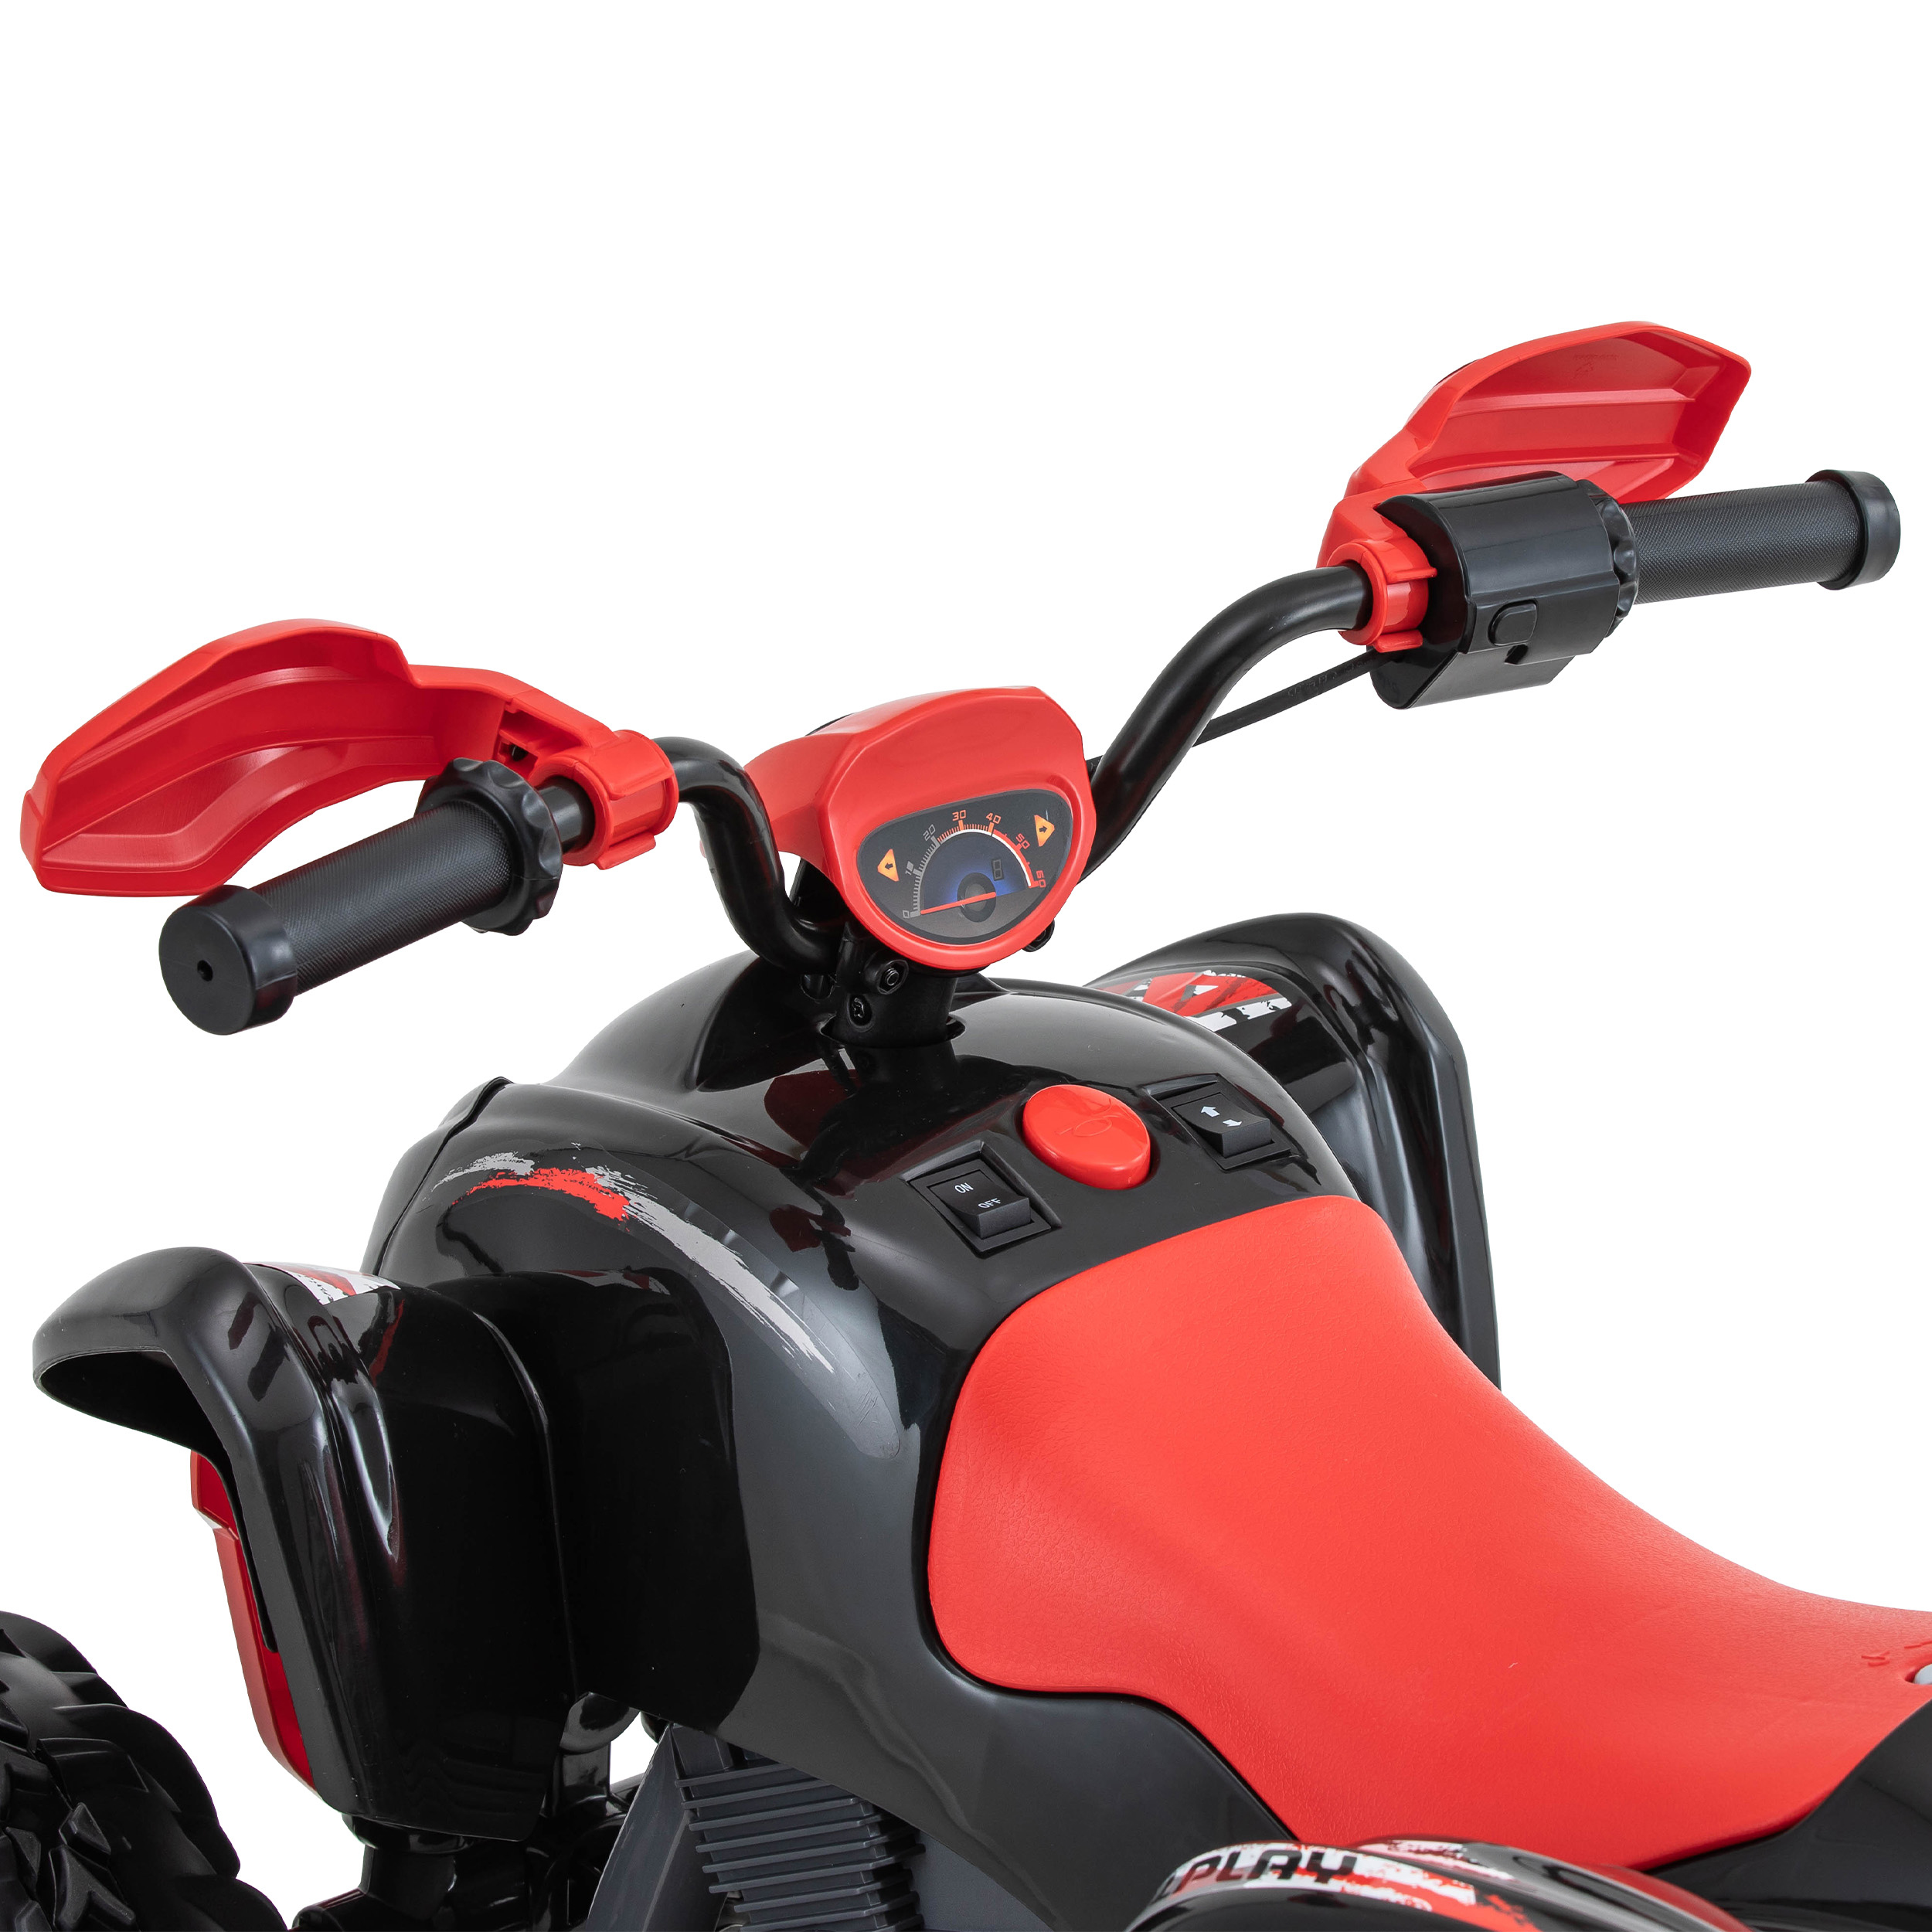 Powersport ATV MAX 12-Volt Battery Ride-On (Red / Black) - image 5 of 9